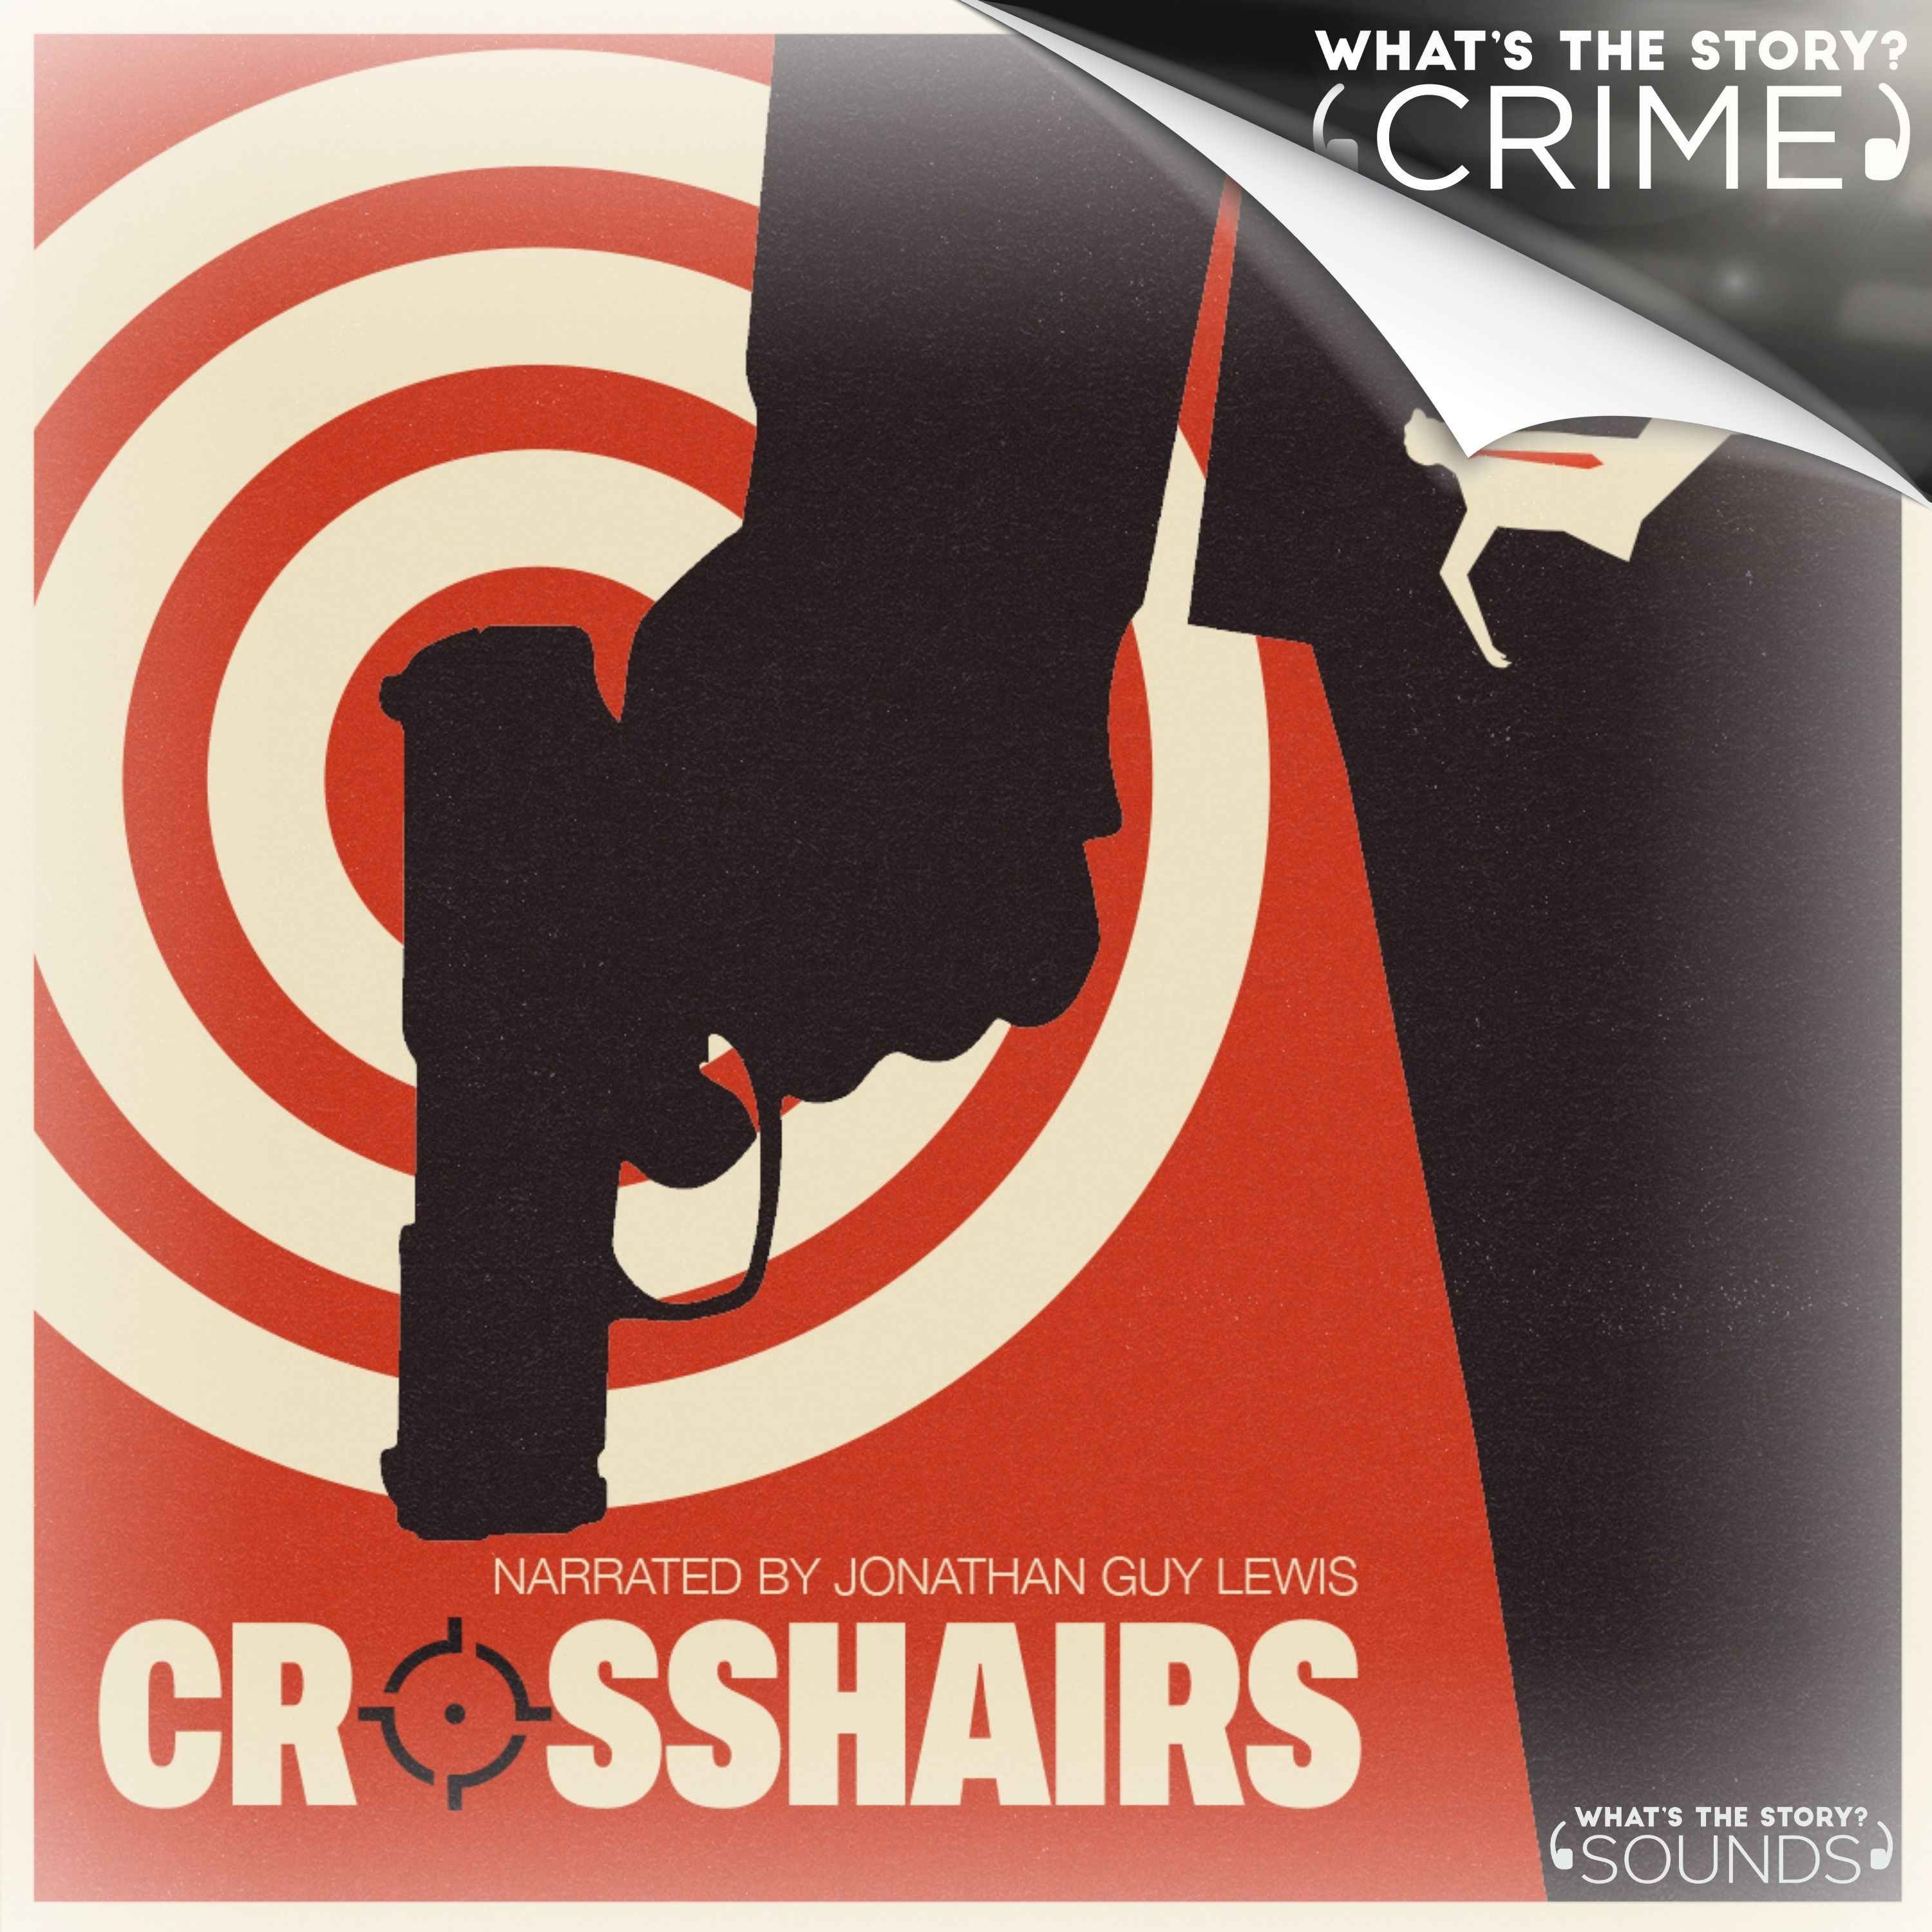 Crosshairs - WTS Crime podcast tile